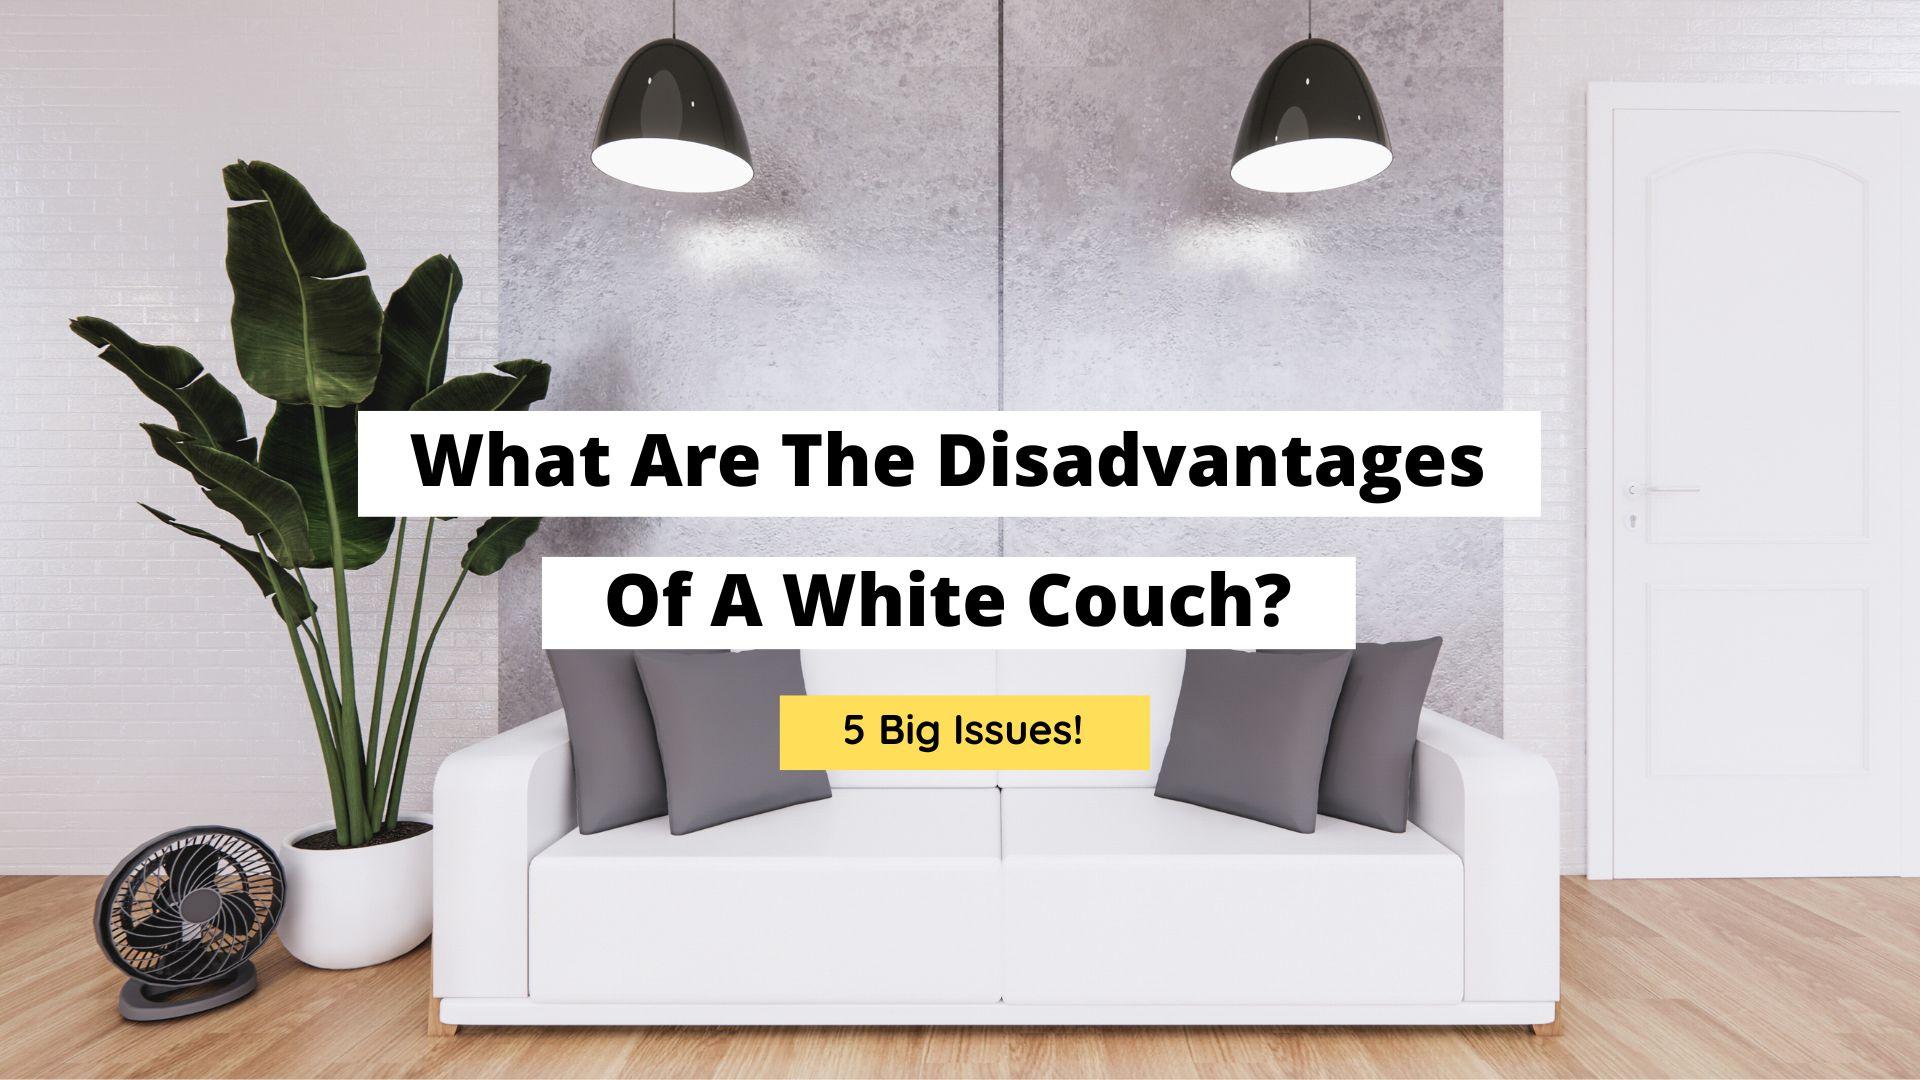 cons of owning a white couch, problems with a white couch